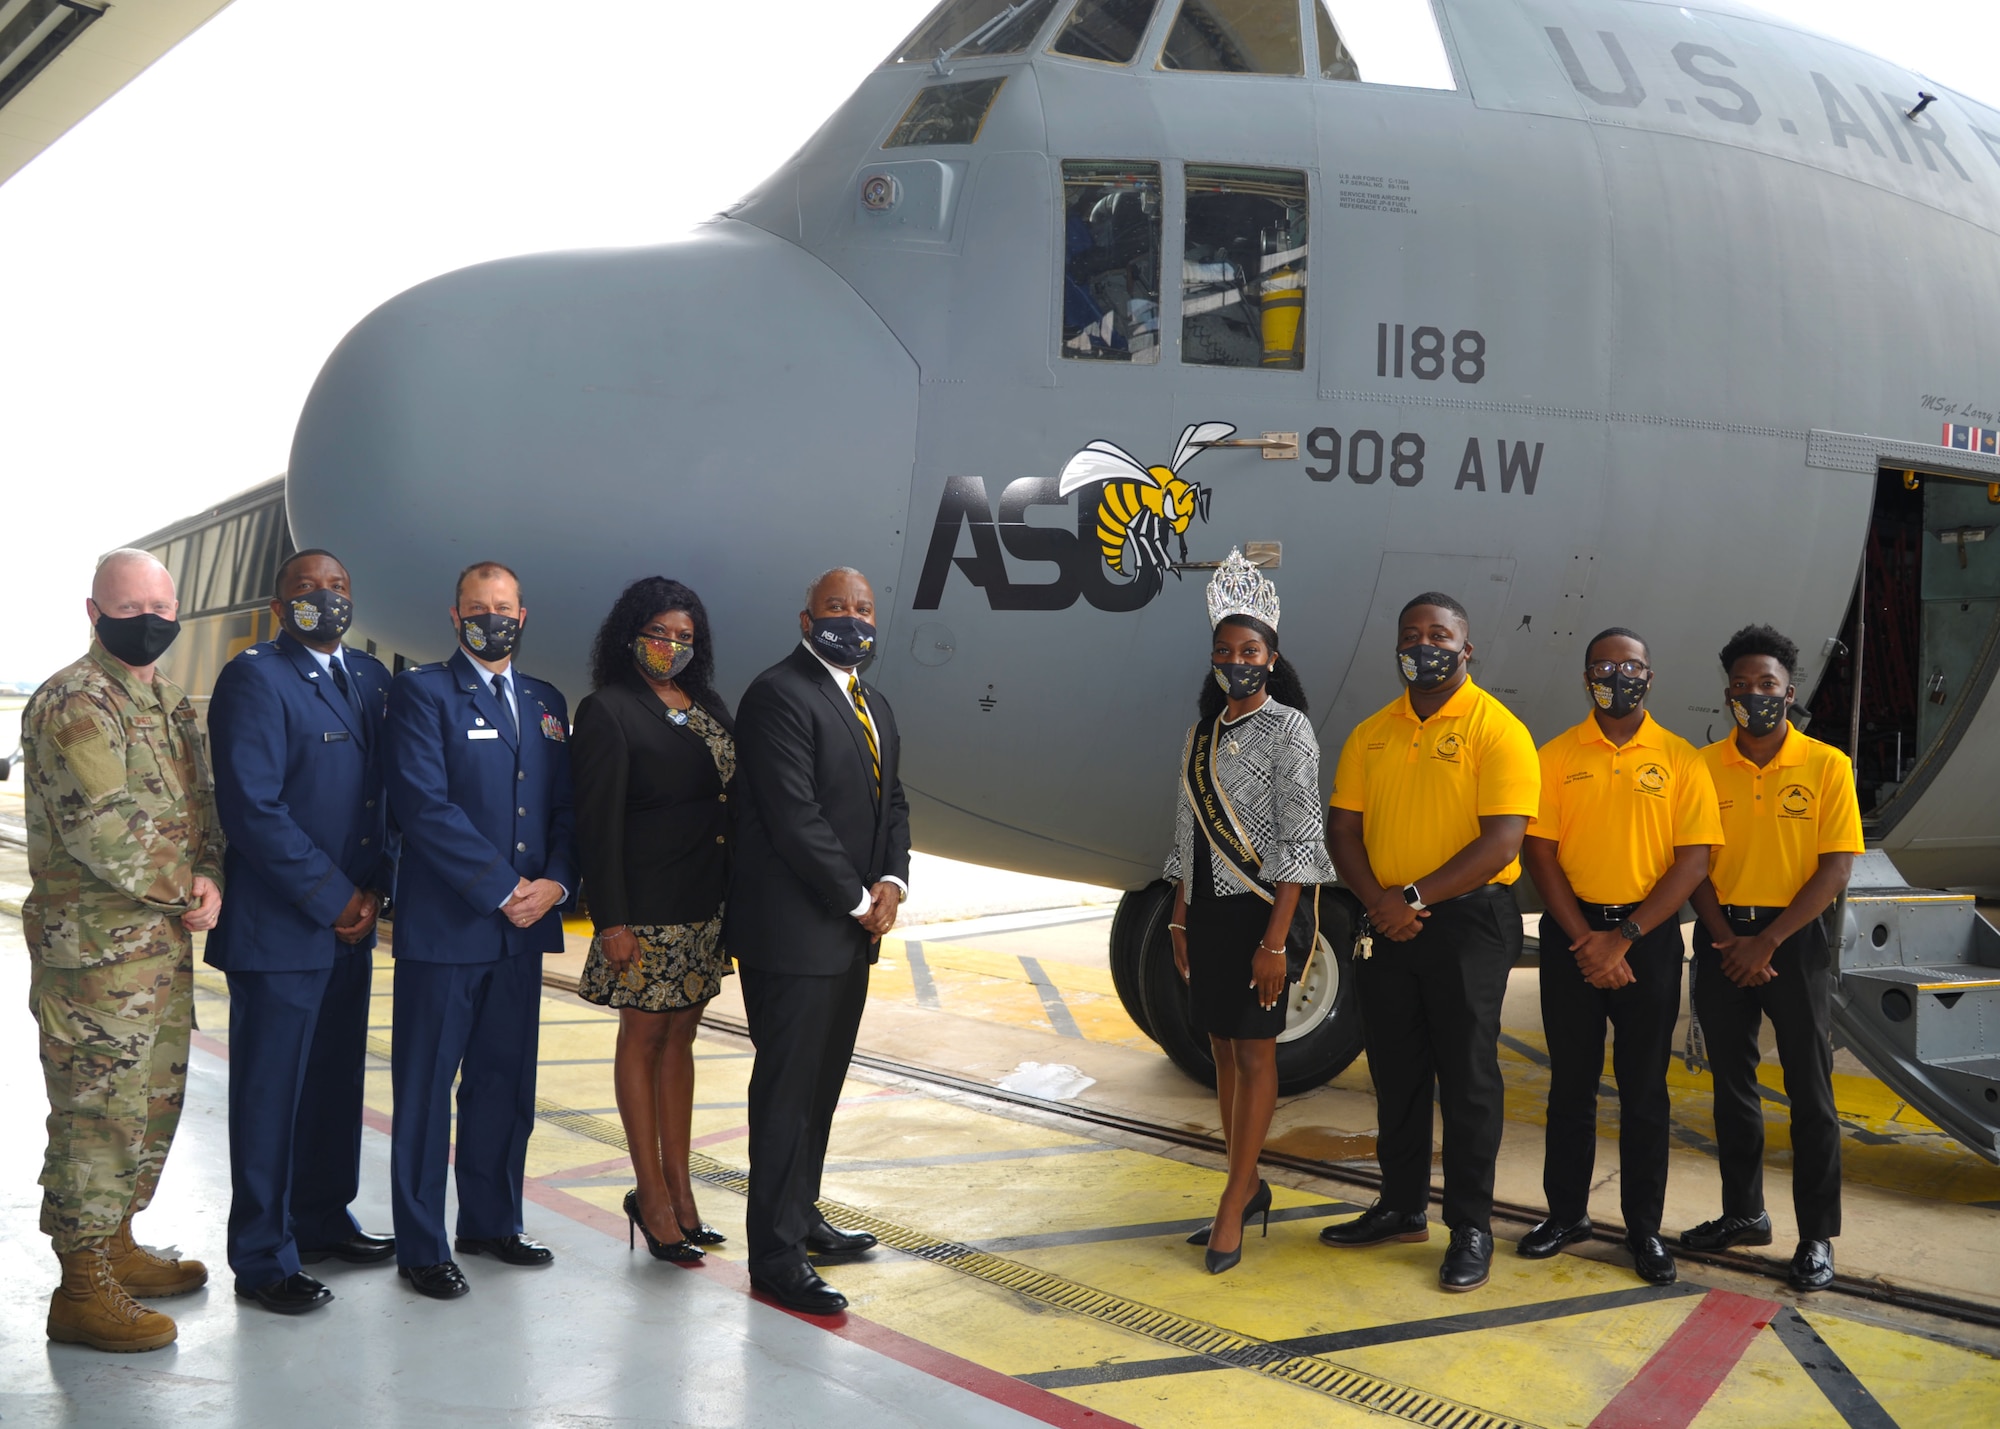 Members of the 908th Airlift Wing and representatives of Alabama State University pose for a photo in front of the newly unveiled ASU nose art at Maxwell Air Force Base, Alabama. The 908th AW commemorated its partnership with ASU by painting the university’s logo on the nose of one of its C-130 H aircraft. (U.S. Air Force photo by Senior Airman Max Goldberg)